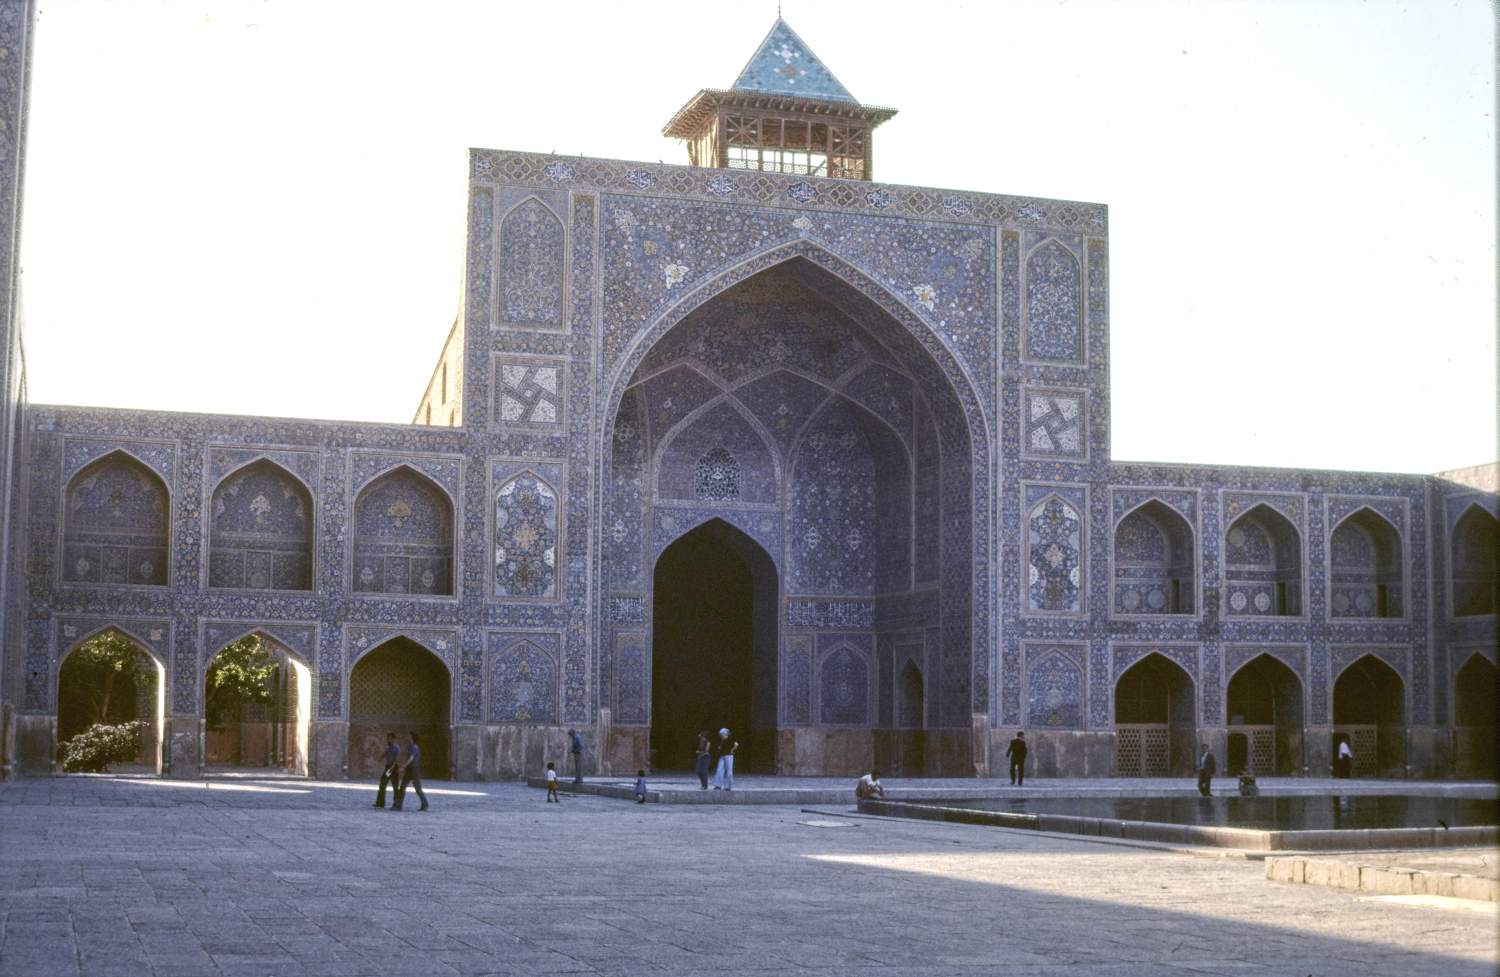 View of iwan on northwest side of courtyard.